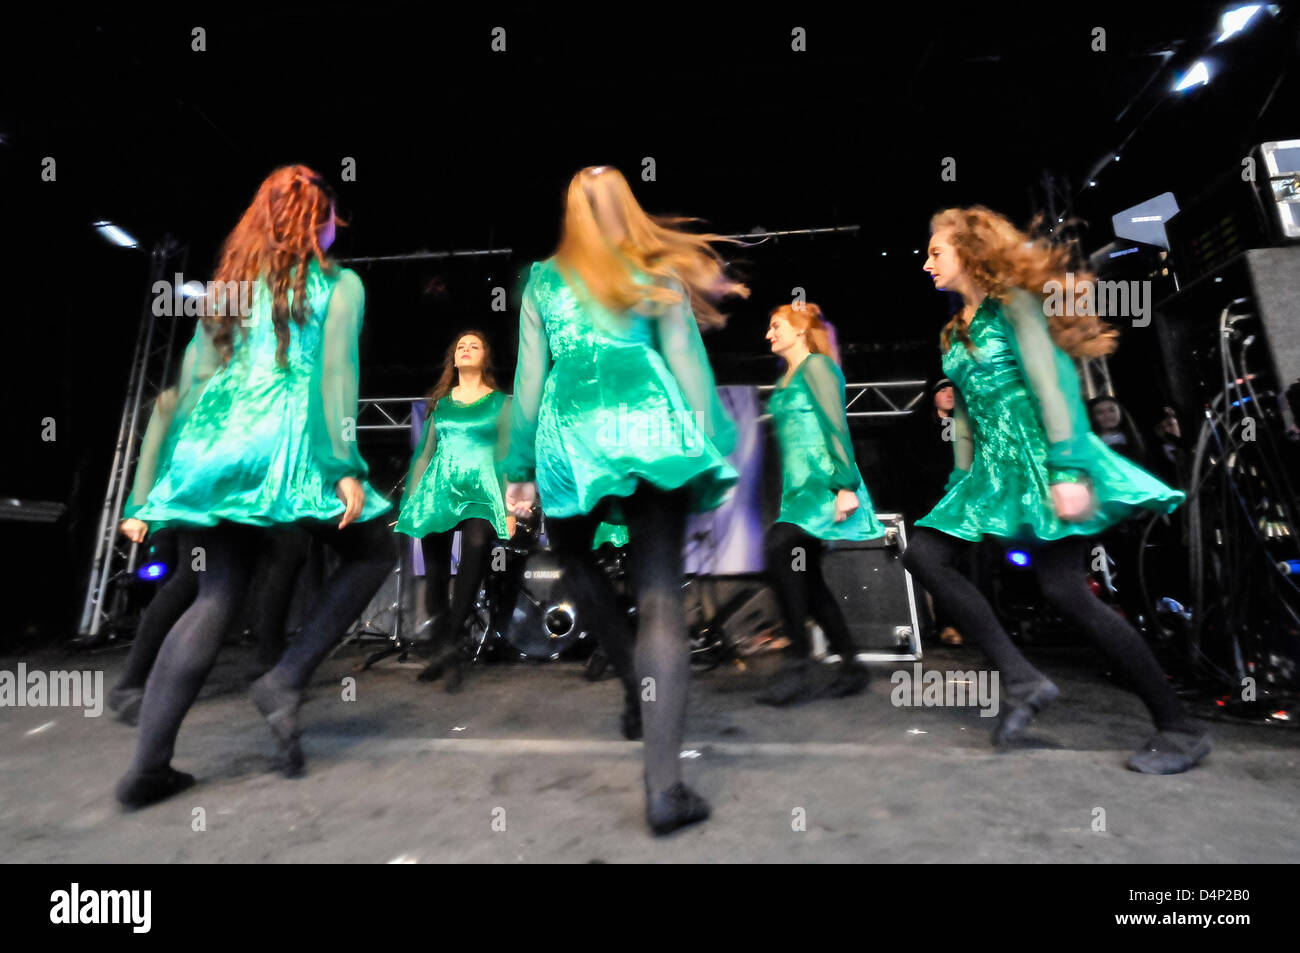 Belfast, Northern Ireland. 17th March, 2013. Irish Dancers perform at the annual St Patrick's Day concert. Stock Photo